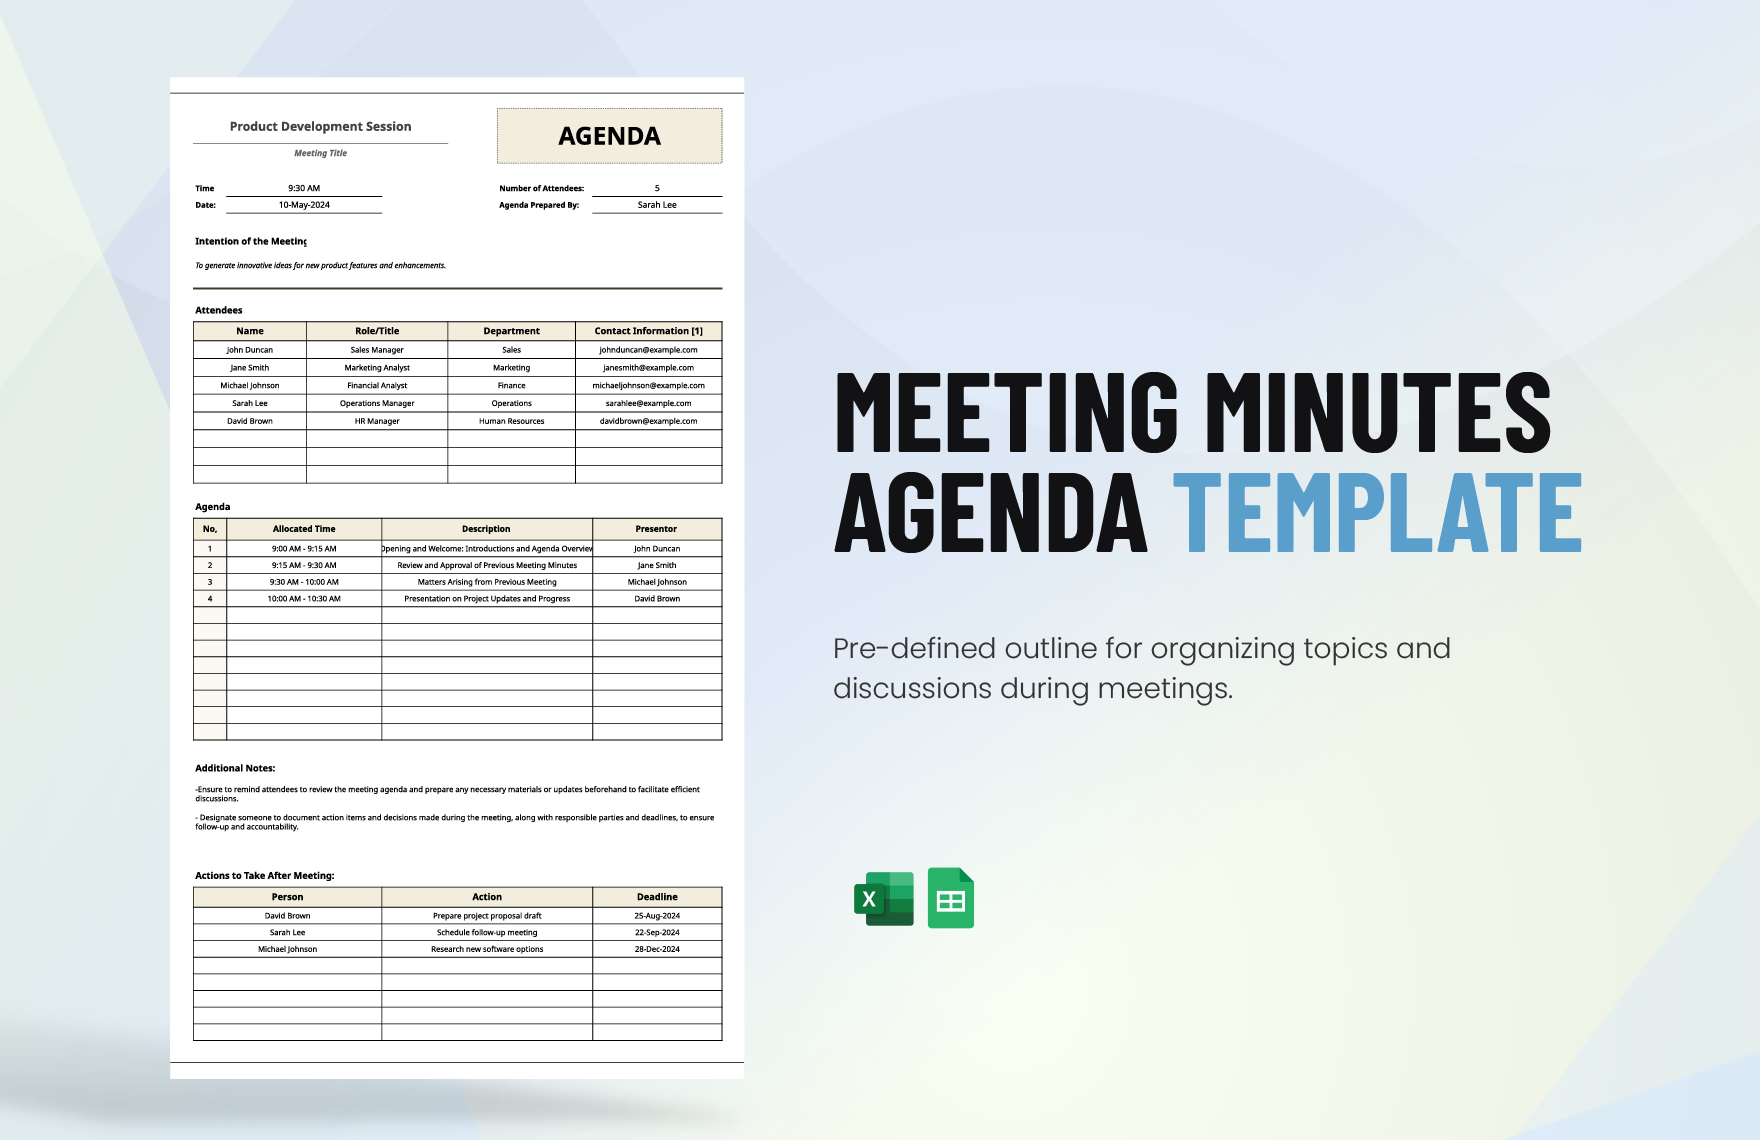 Meeting Minutes Agenda Template in Excel, Google Sheets